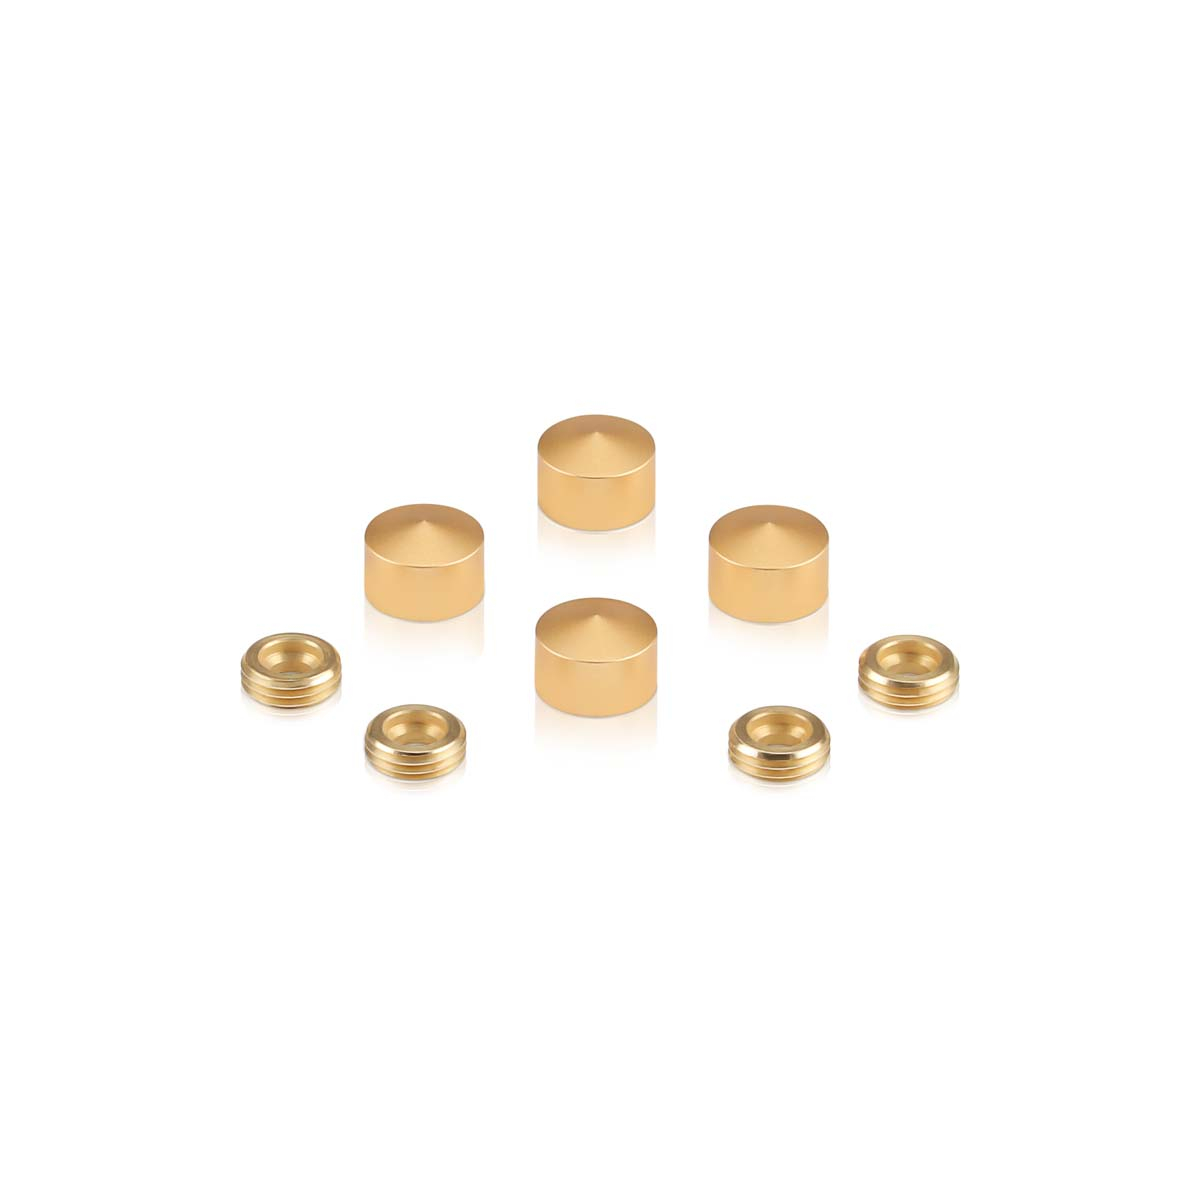 Set of 4 Conical Screw Cover, Diameter: 1/2'', Aluminum Champagne Anodized Finish (Indoor or Outdoor Use)